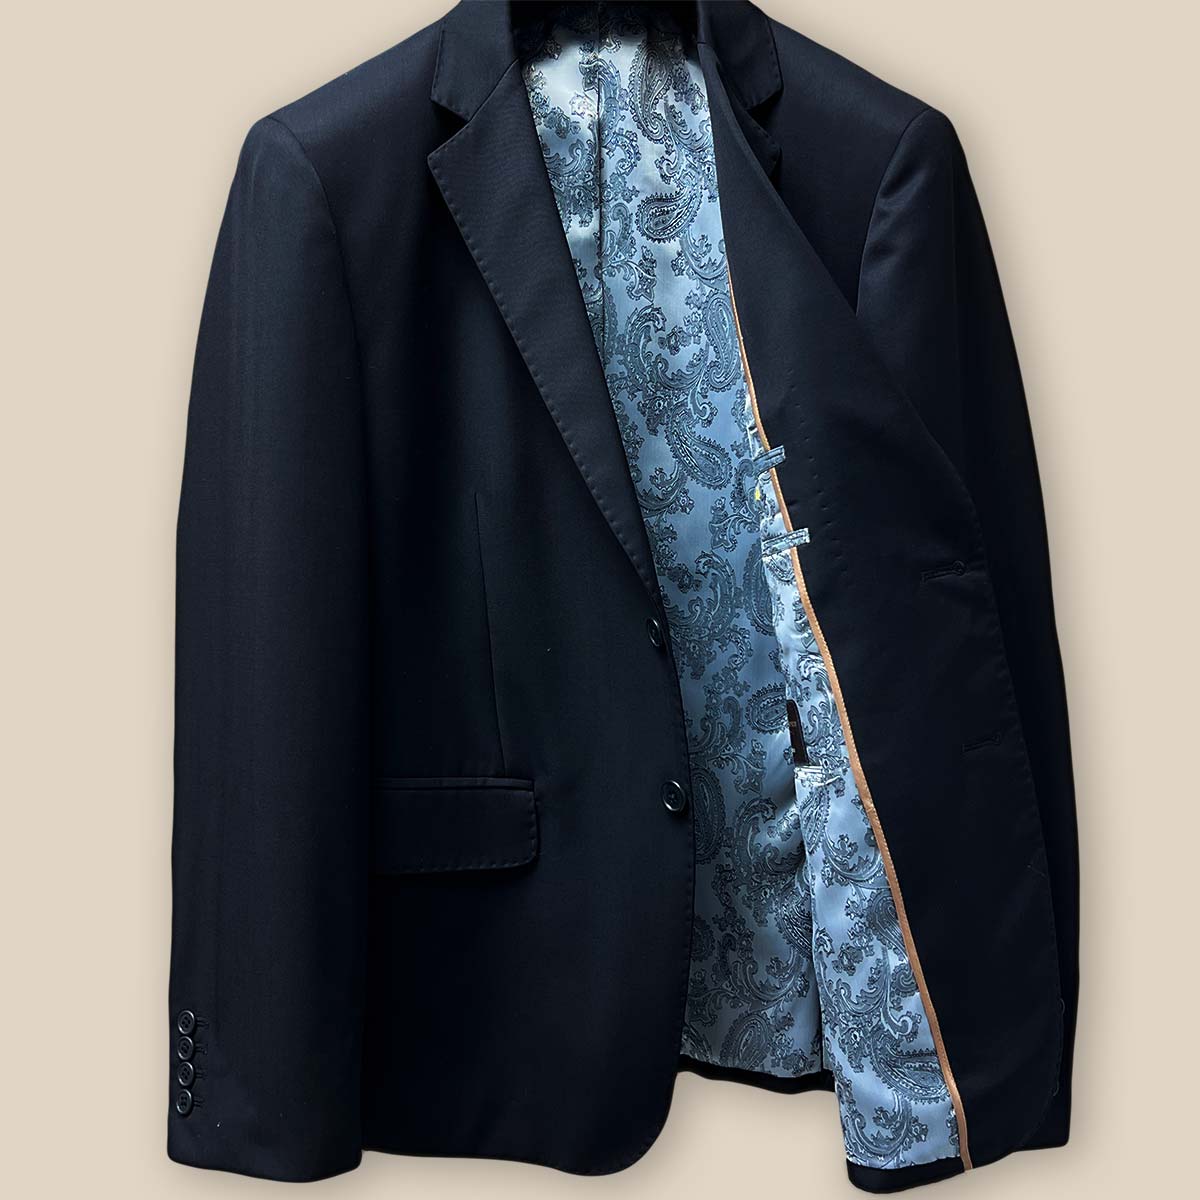 Interior view of the left side of a black Vitale Barberis Canonico suit jacket, revealing silver paisley lining and inner pockets.